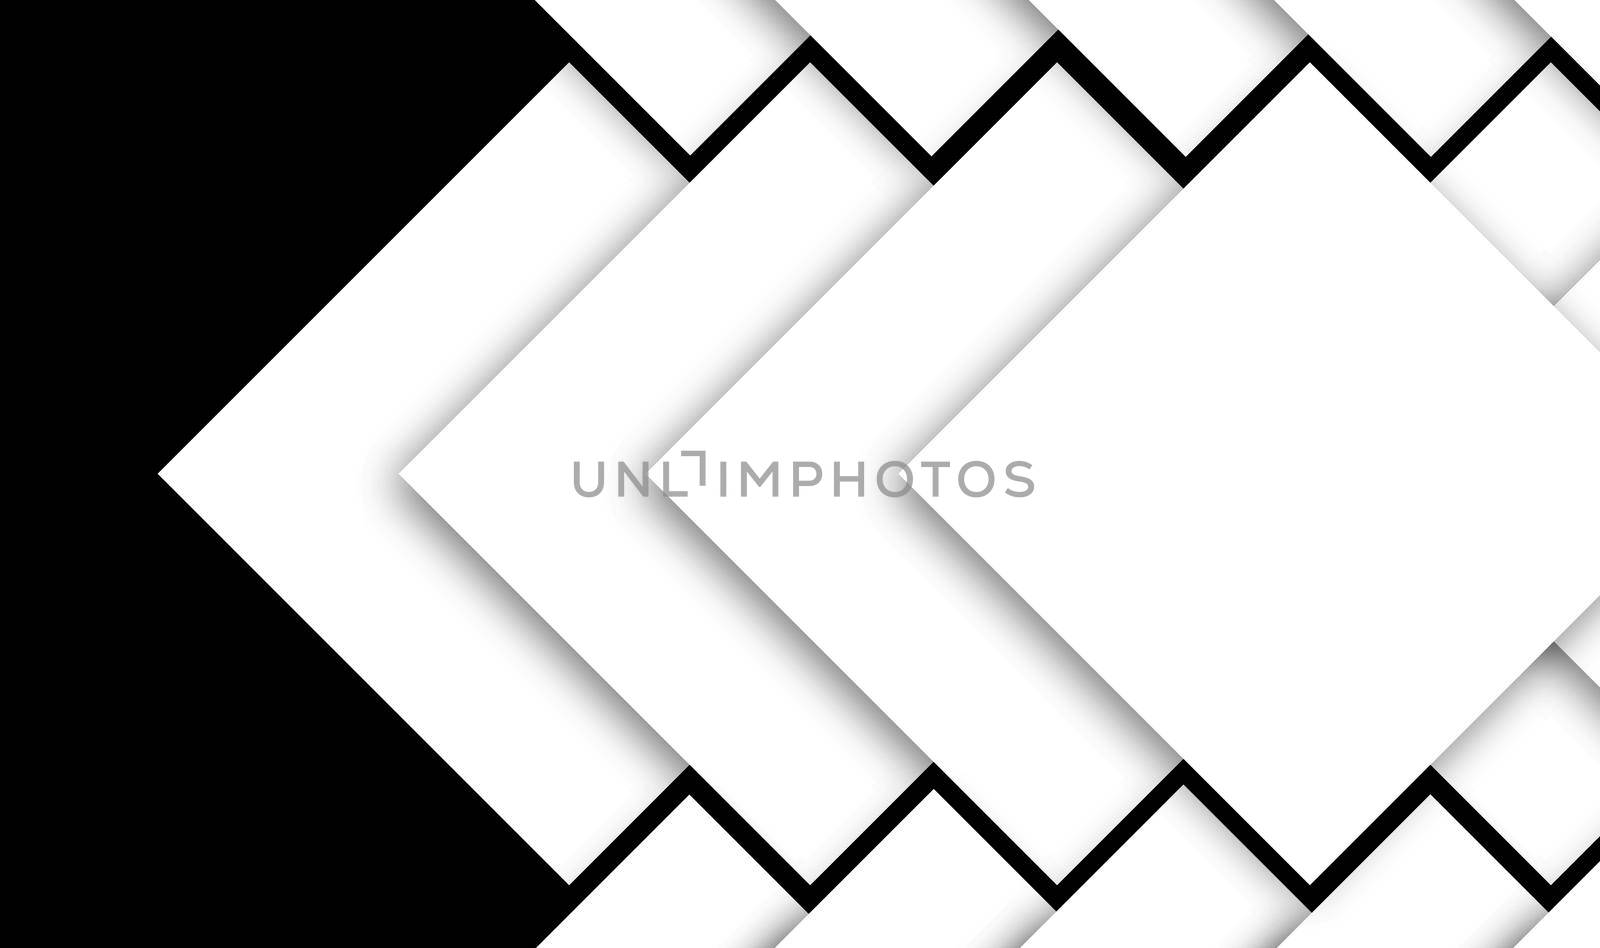 abstract concept design made of squares creating design by overlapping on each other and tilted upside down creating zig zag in the negative space in black isolated background with soft shadow, layered image ready to print for cards, invitation, design print by tabishere